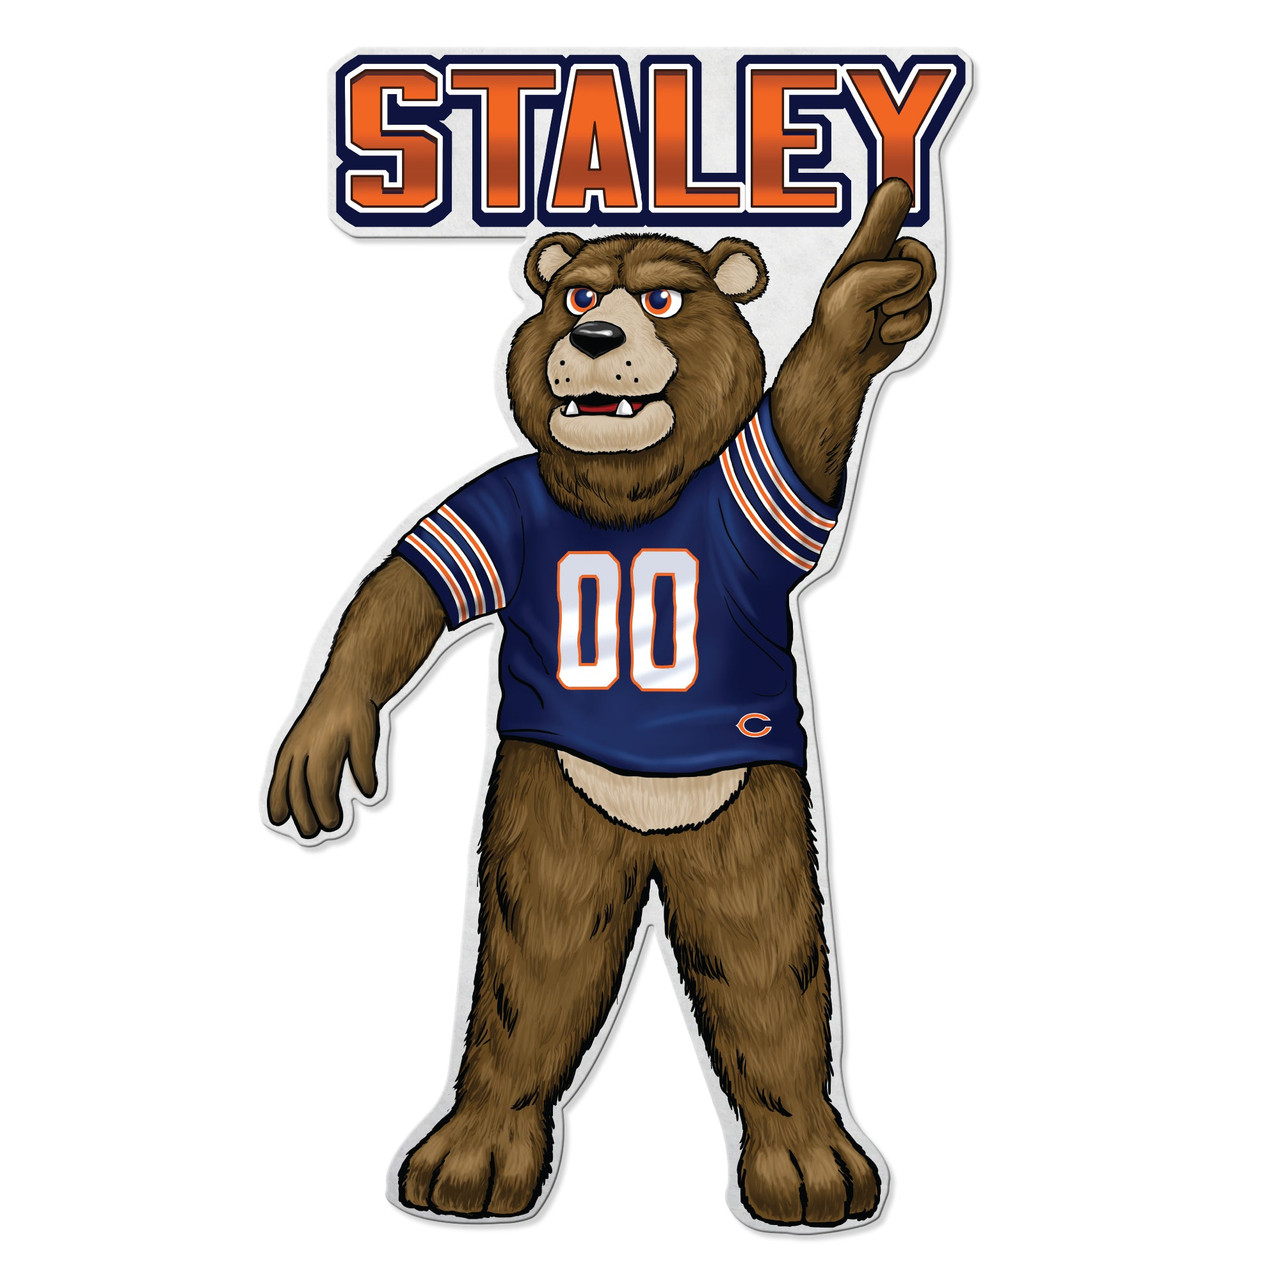 Chicago Bears Clipart 